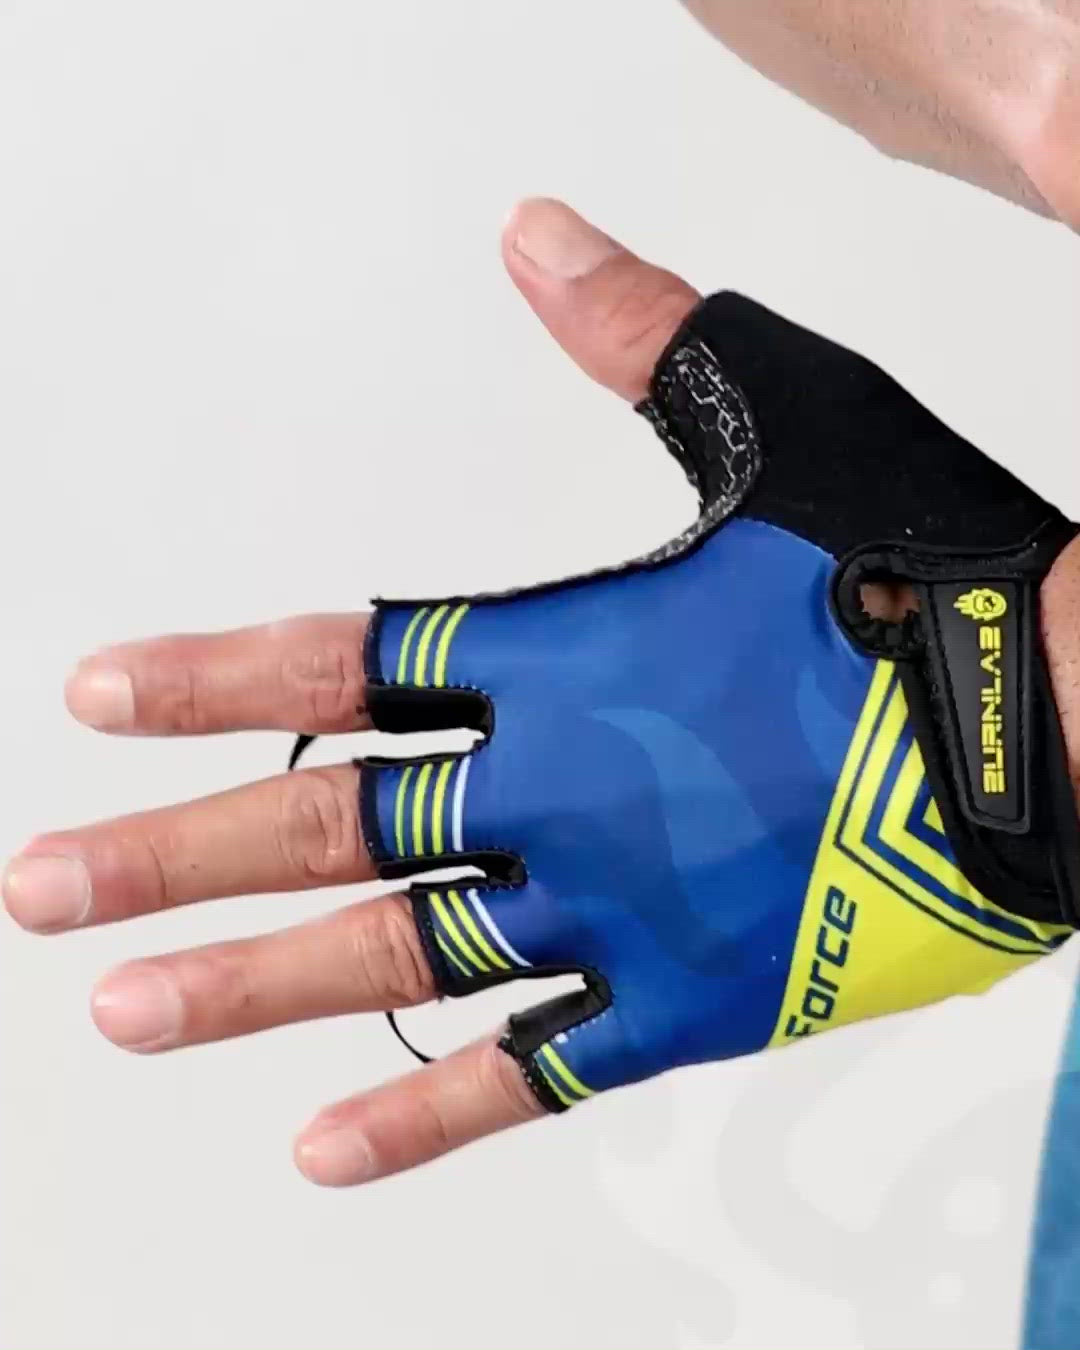 RYMNT Full Fingers Workout Gloves for Women Men-Gym Gloves for Women Weight  Lifting, Exercise Crossfit Gloves-Touch Screen-Extra Grip  Foam-Padded,Anti-Slip for Fitness,Training,Cycling. price in UAE,   UAE